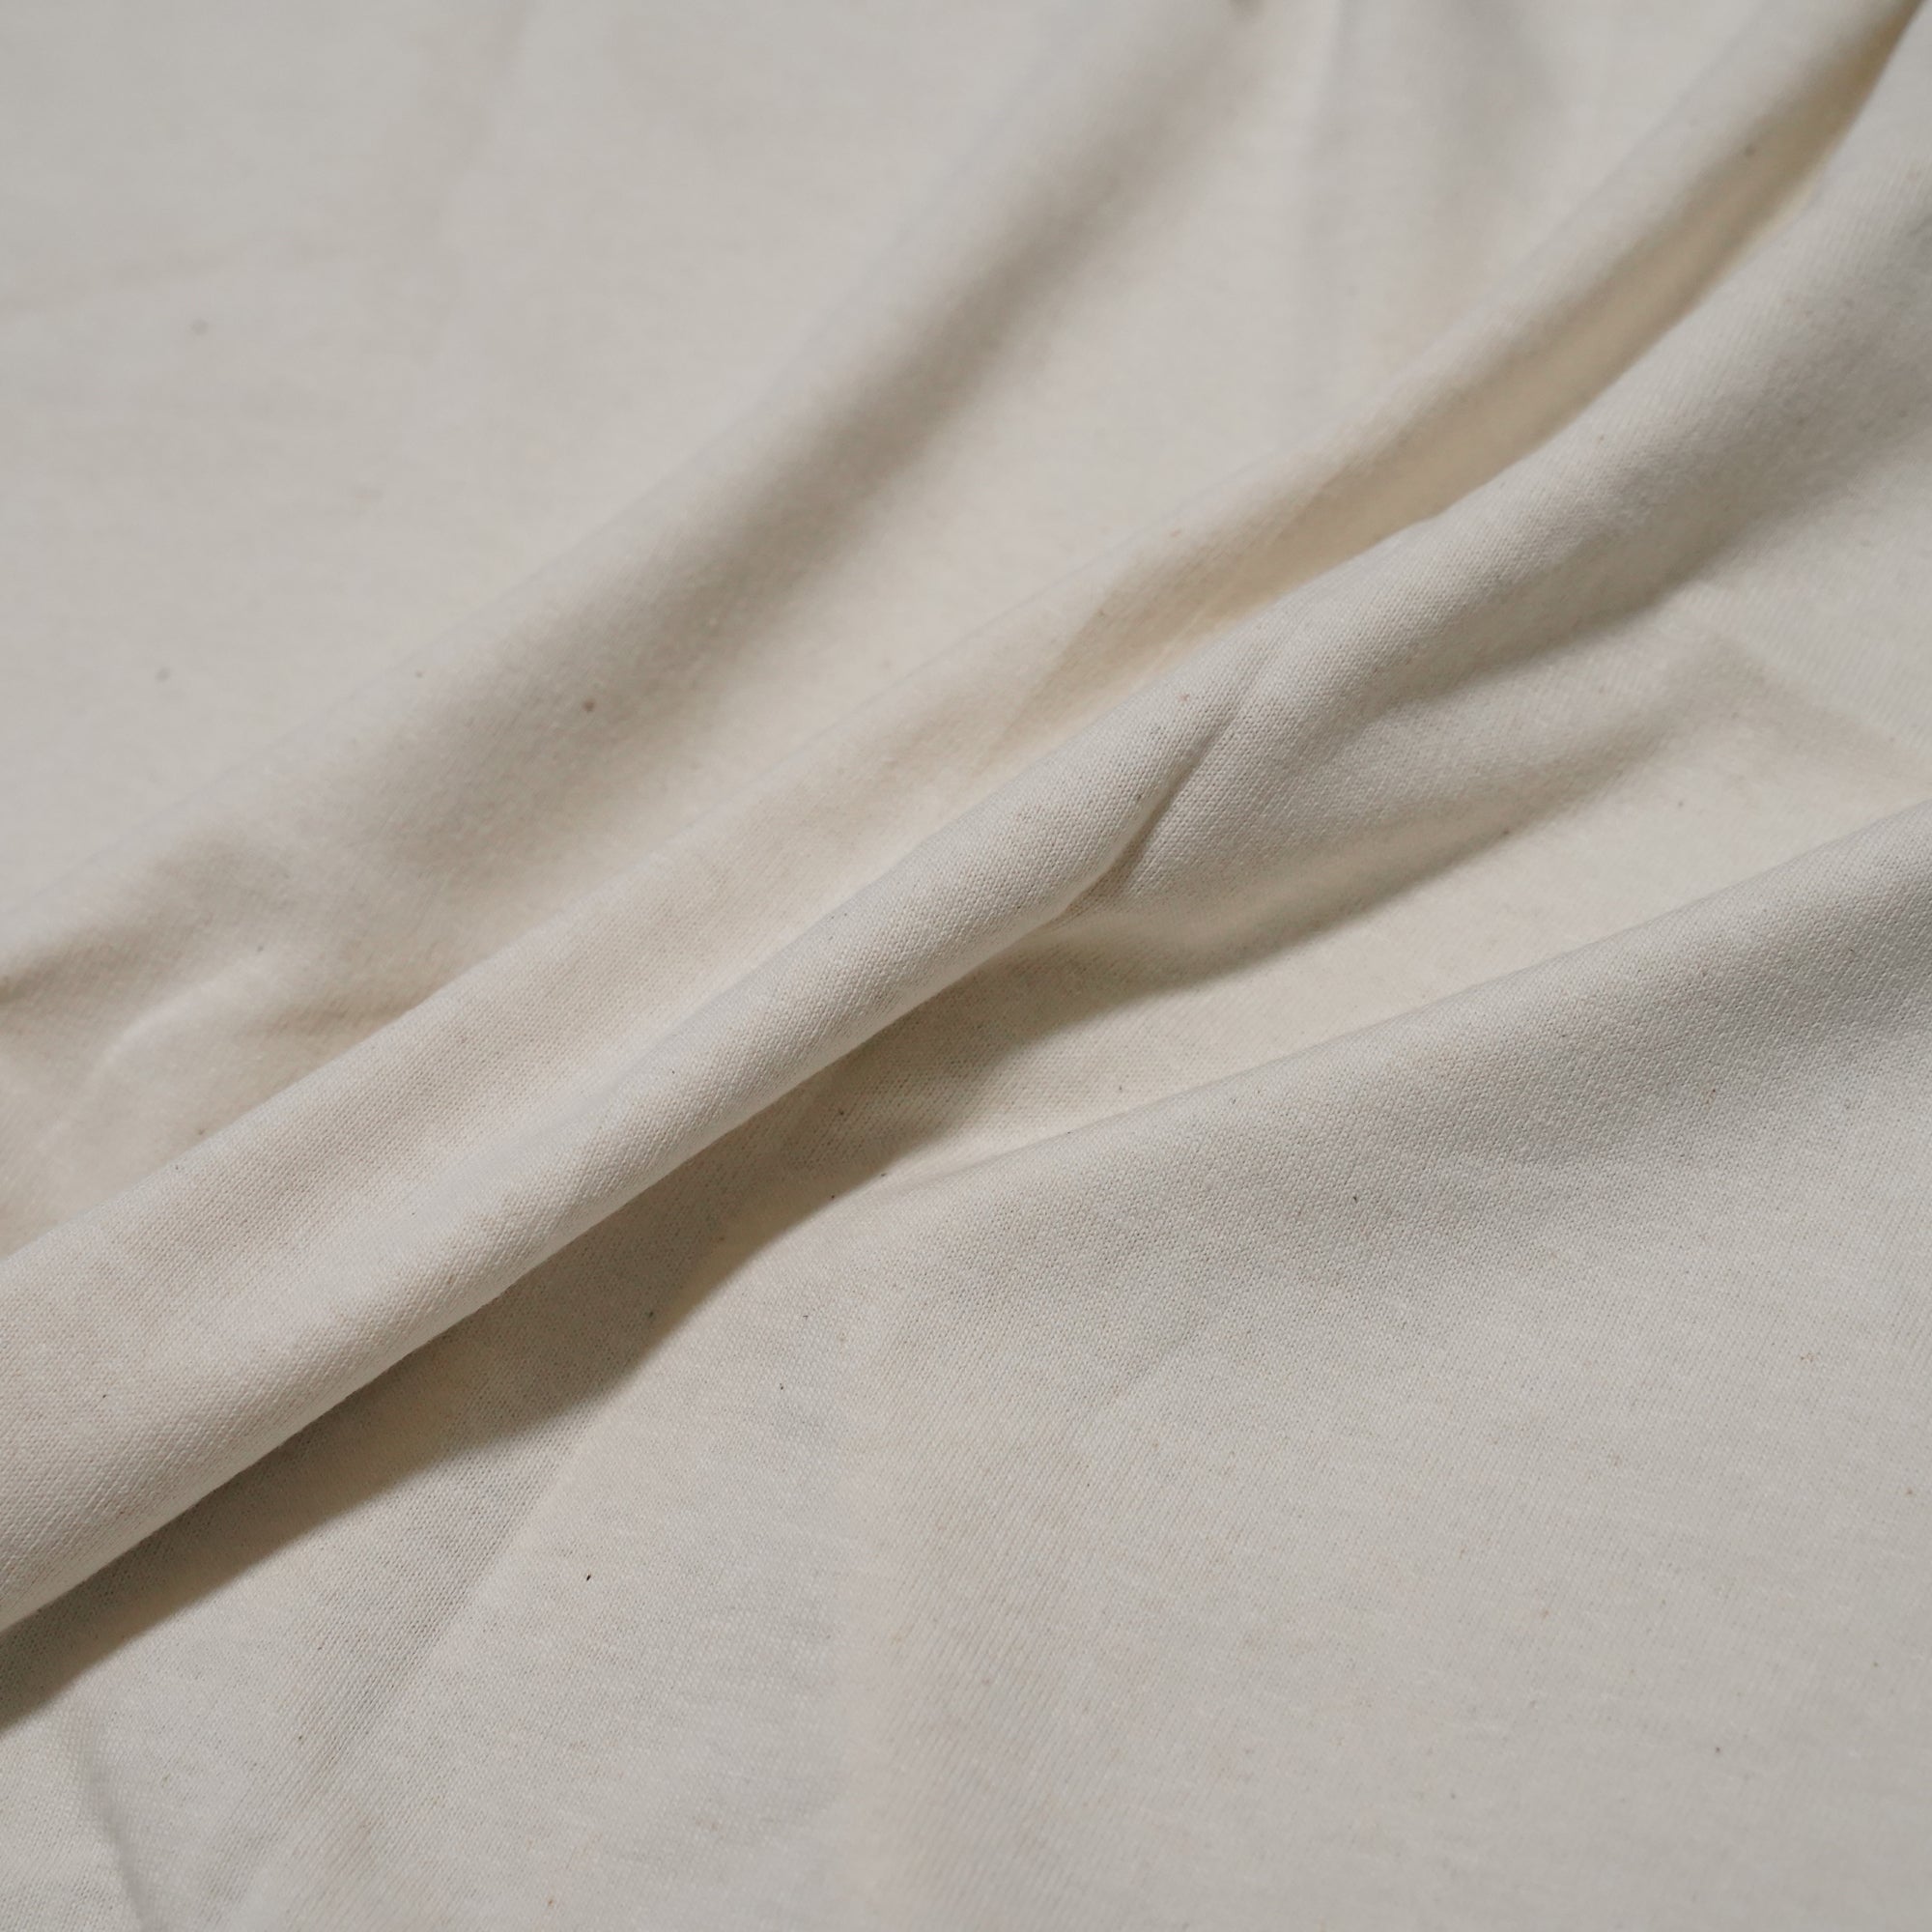 No:ST-6200 | Name: NIGHT SHIRTS | Color:Natural | Size:ONE 【Save Our Soil】-SAVE OUR SOIL-ADDICTION FUKUOKA